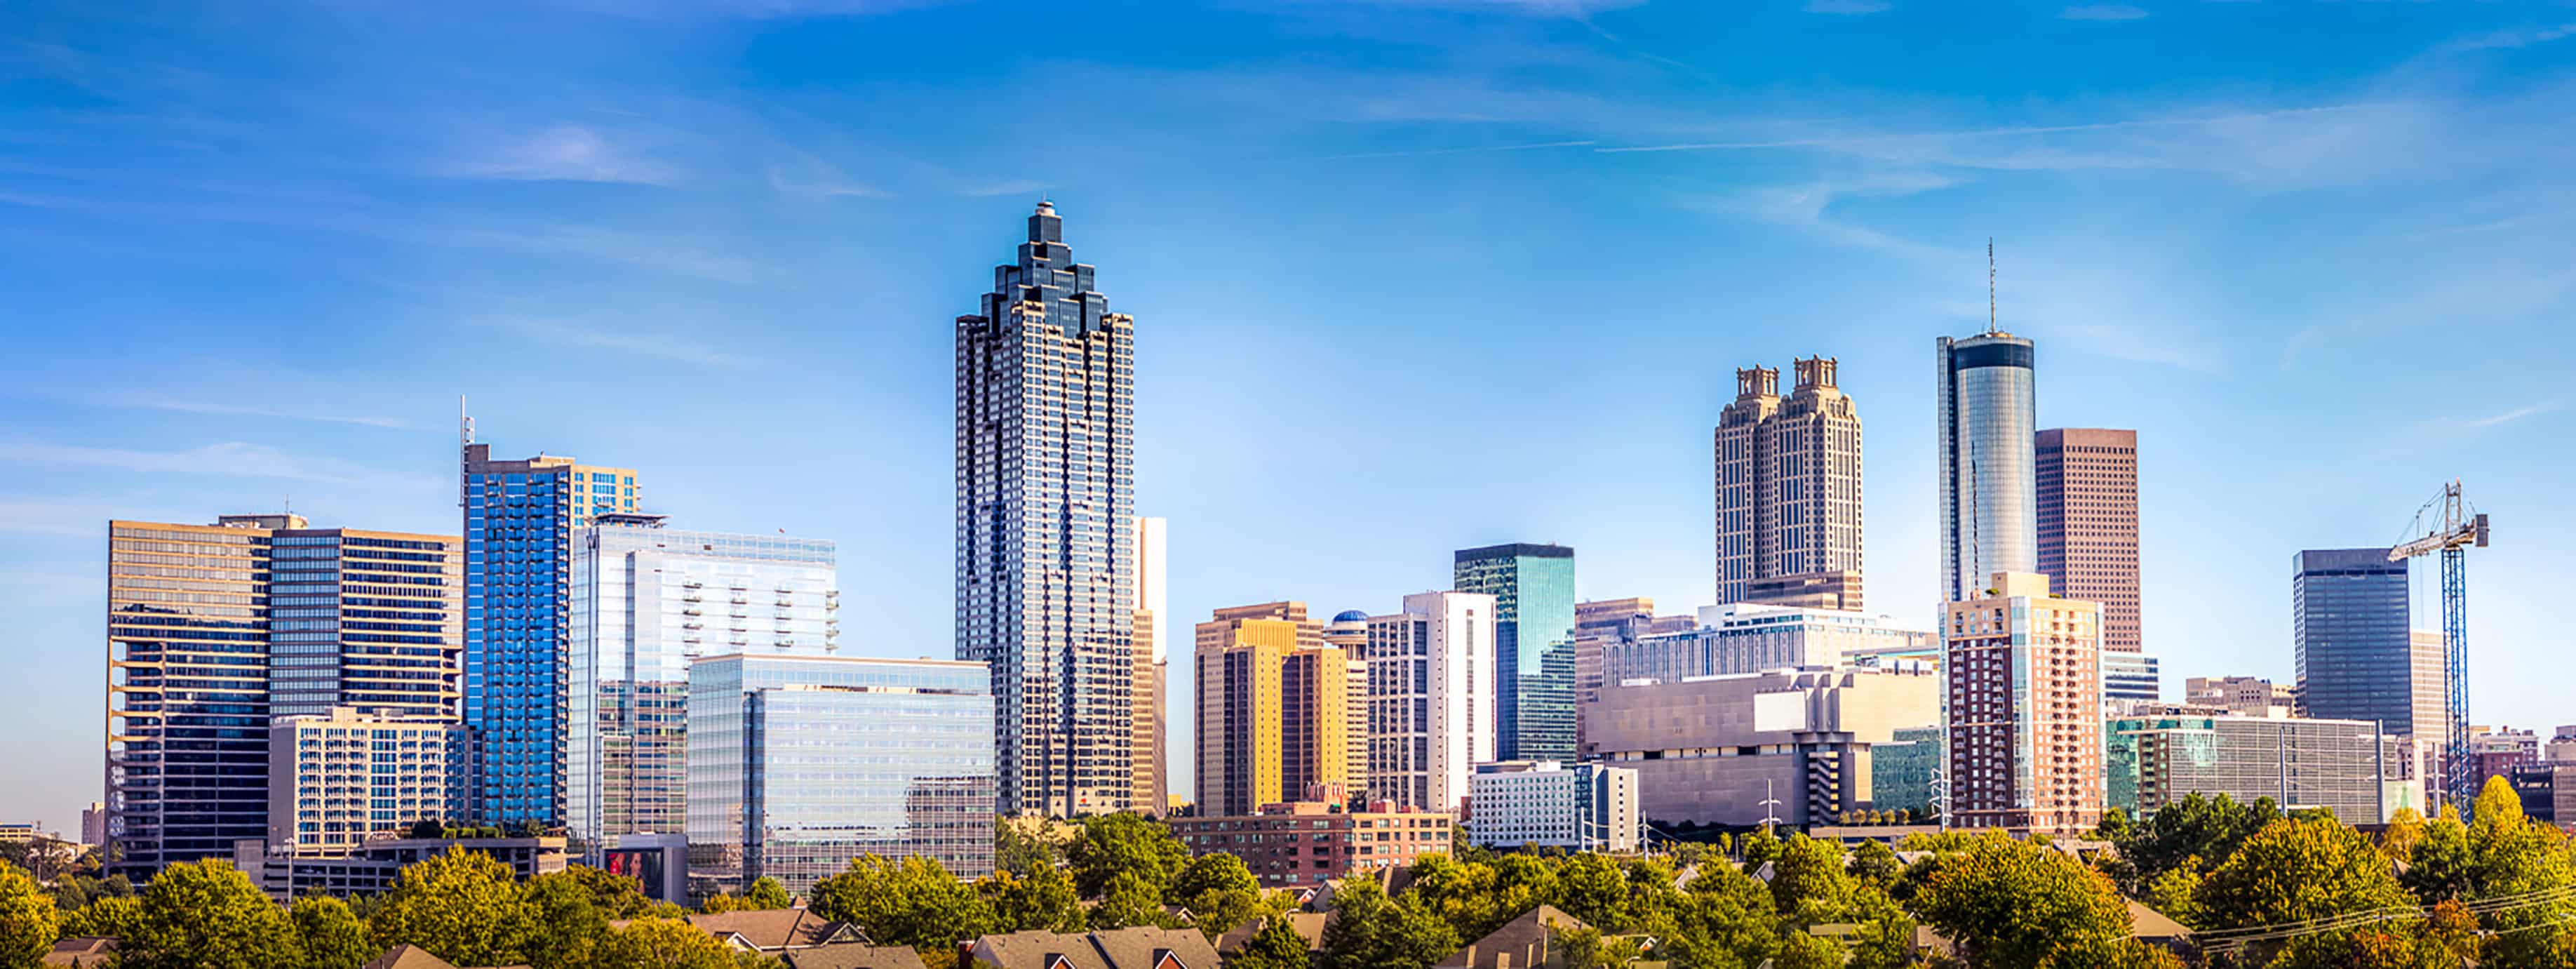 Downtown Atlanta Skyline showing several prominent buildings and hotels